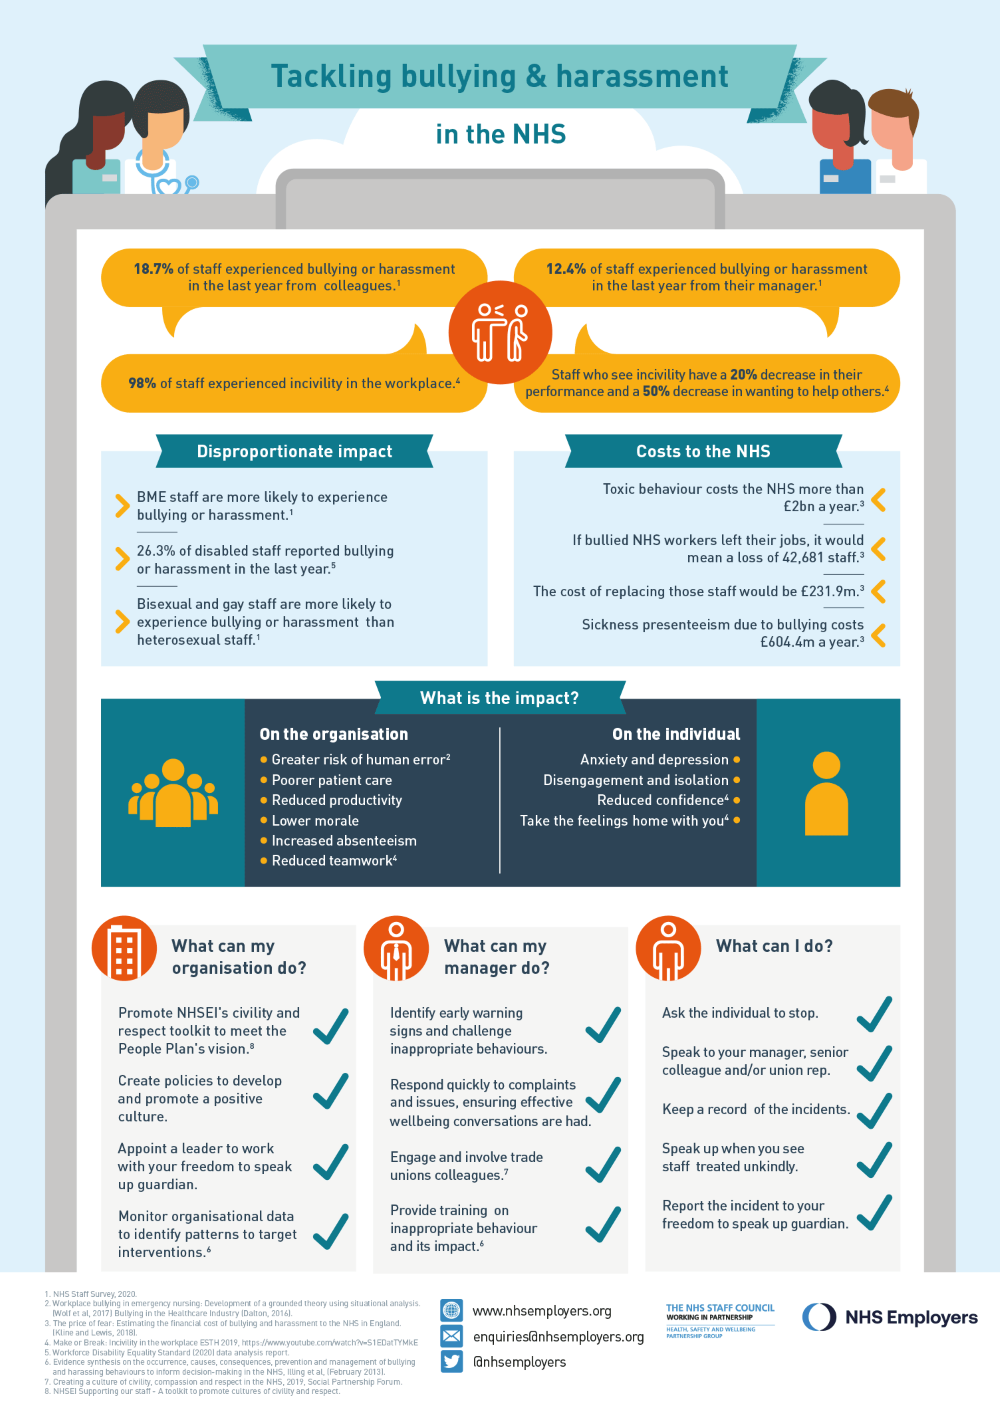 Tackling bullying in the NHS infographic